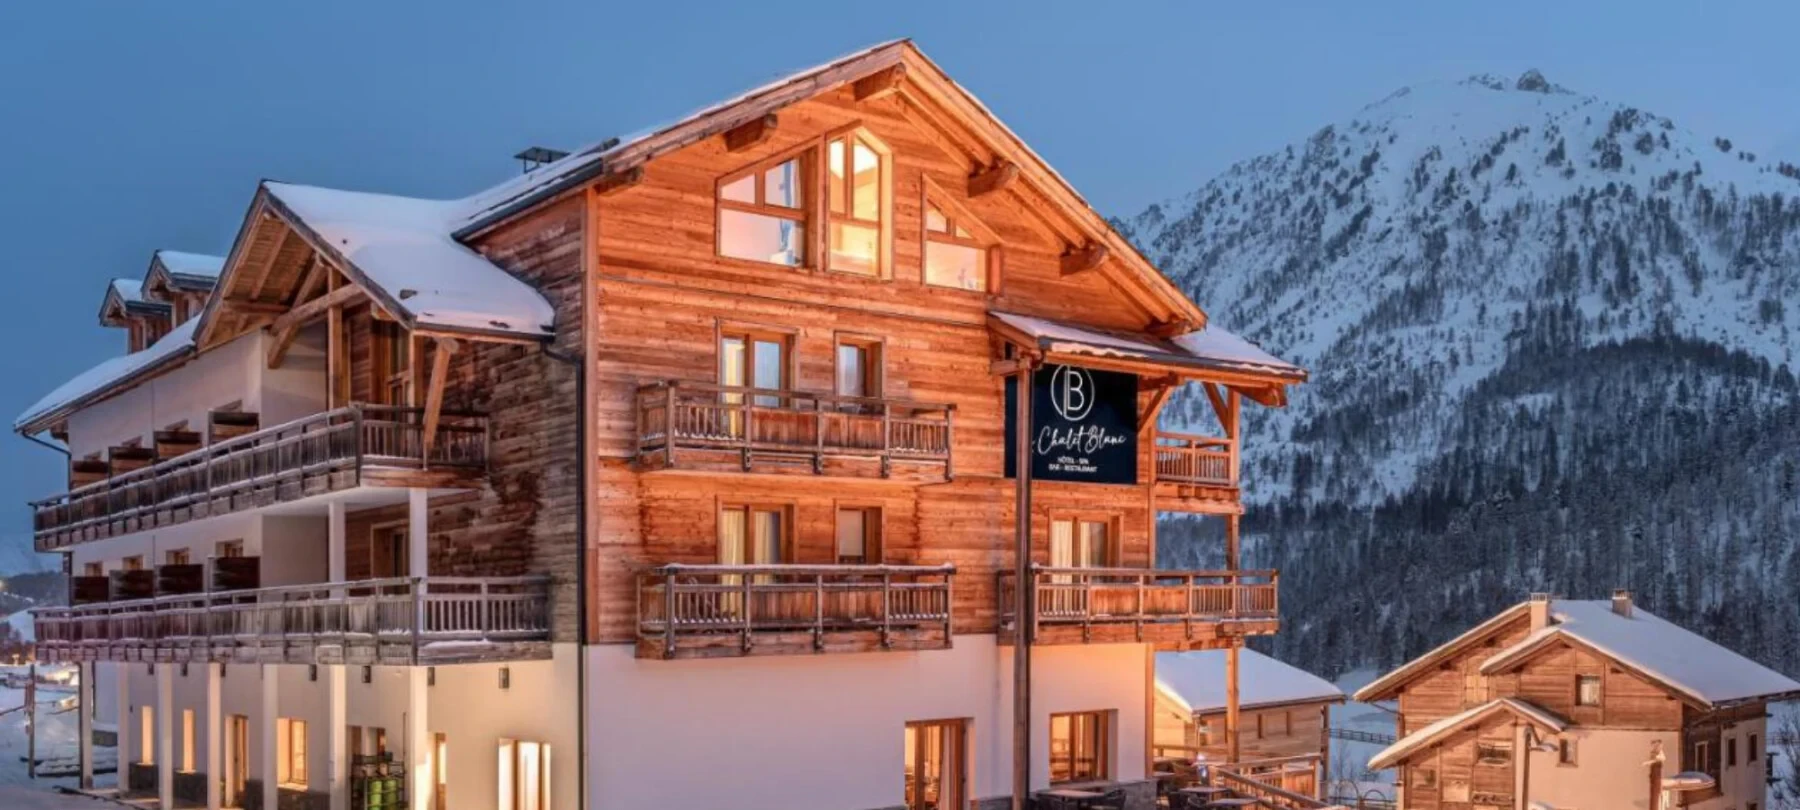 Le Chalet Blanc Hotel & Spa Hotel Exterior